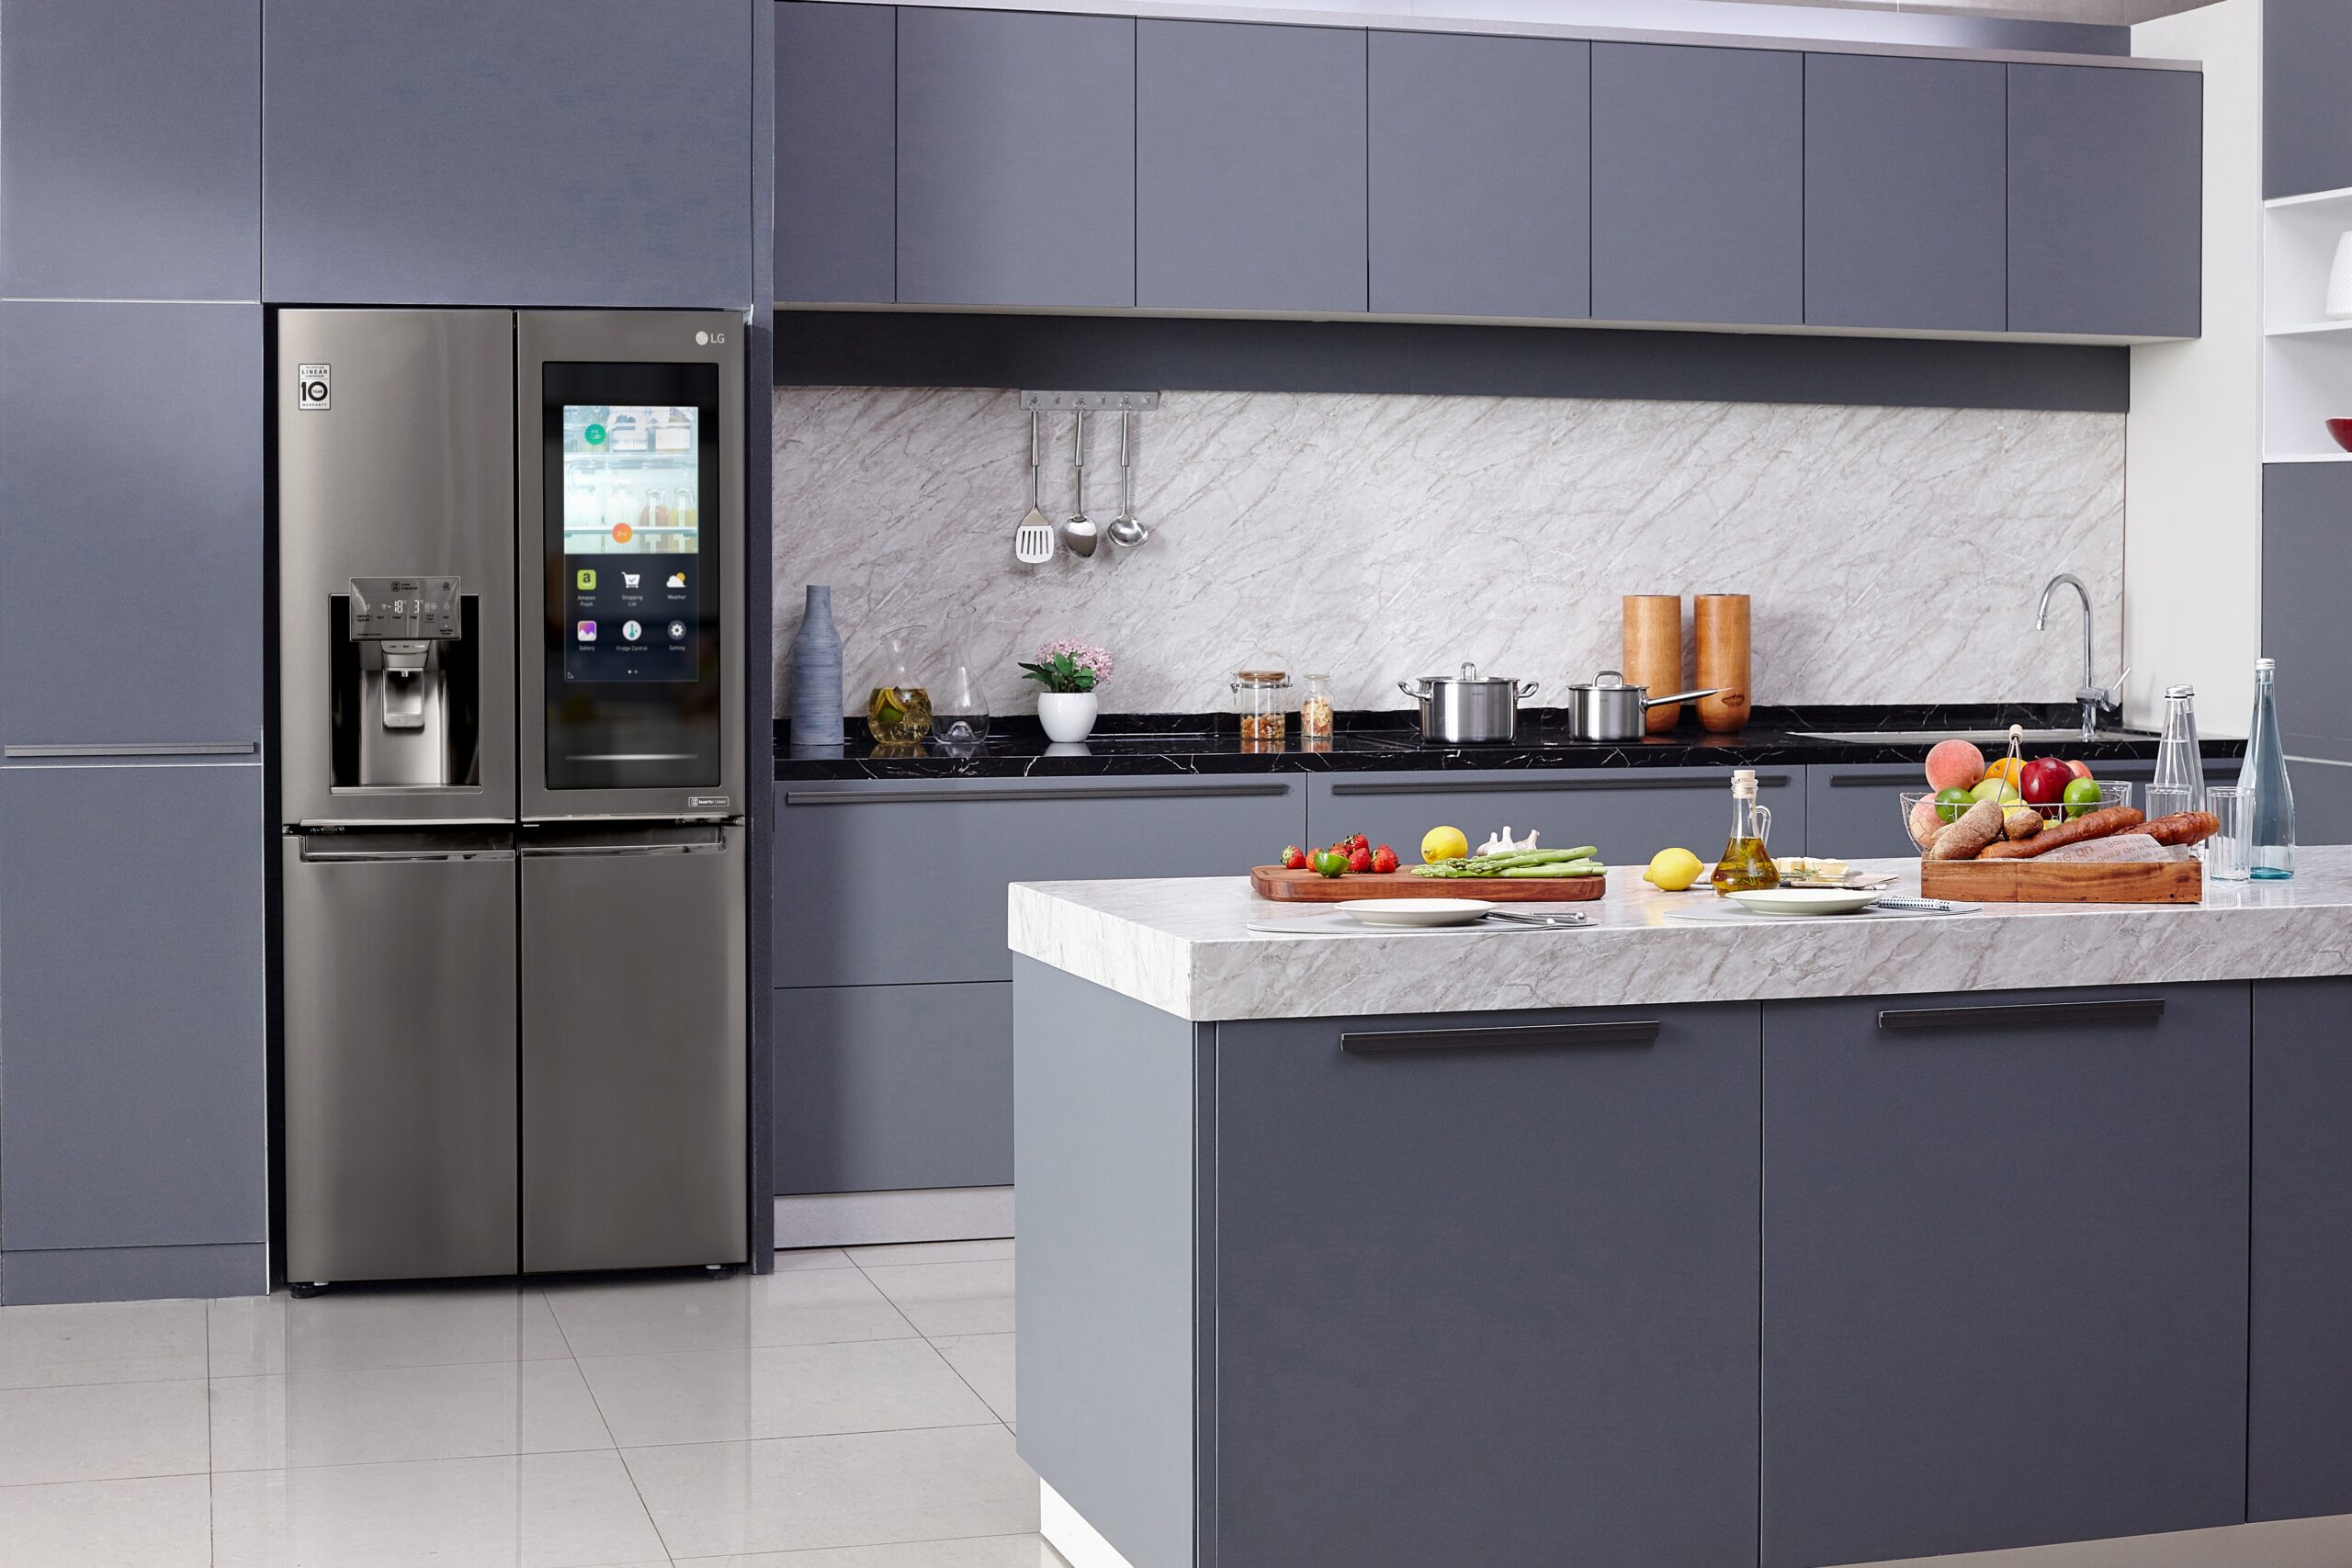 LG InstaView™ ThinQ refrigerator installed inside a modern kitchen with its Smart InstaView touch panel activated.